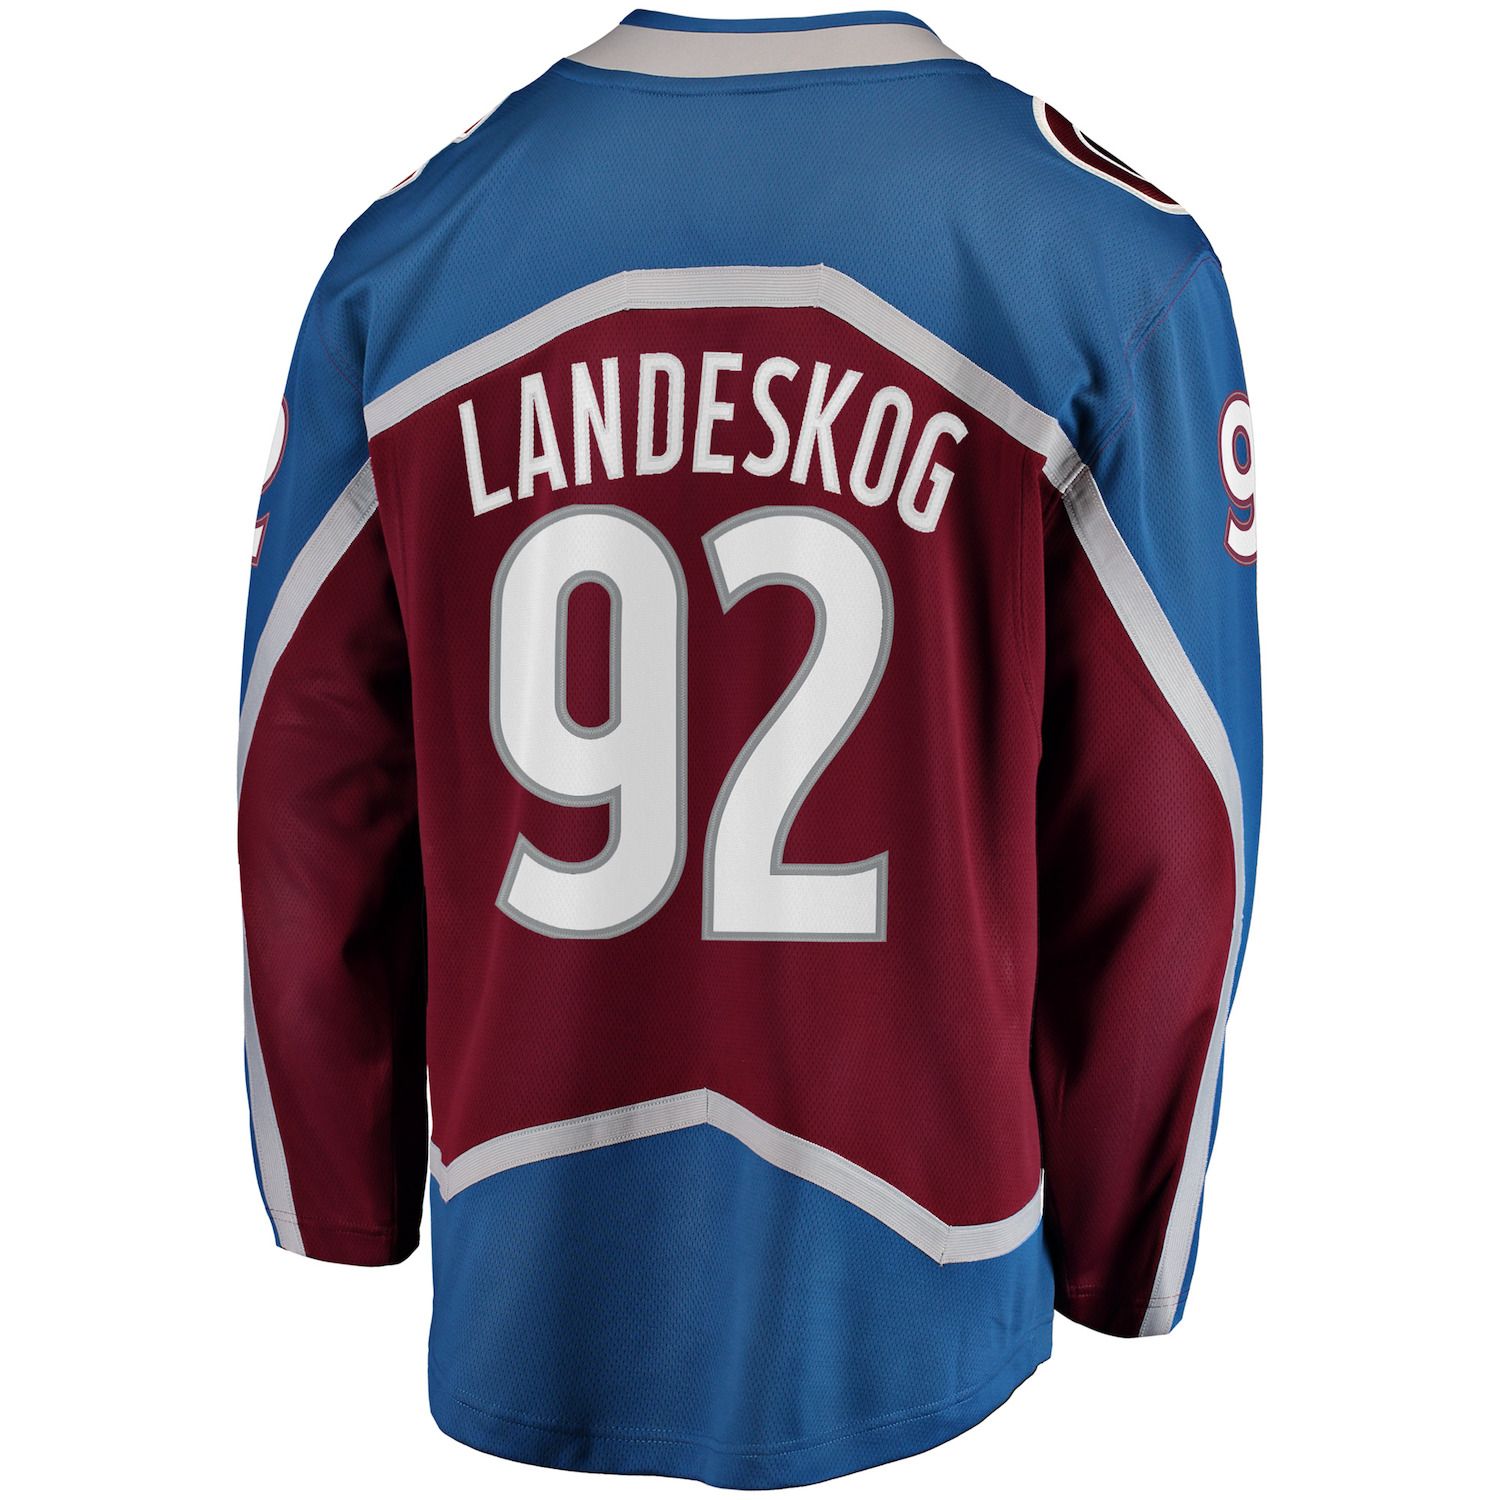 avalanche jersey